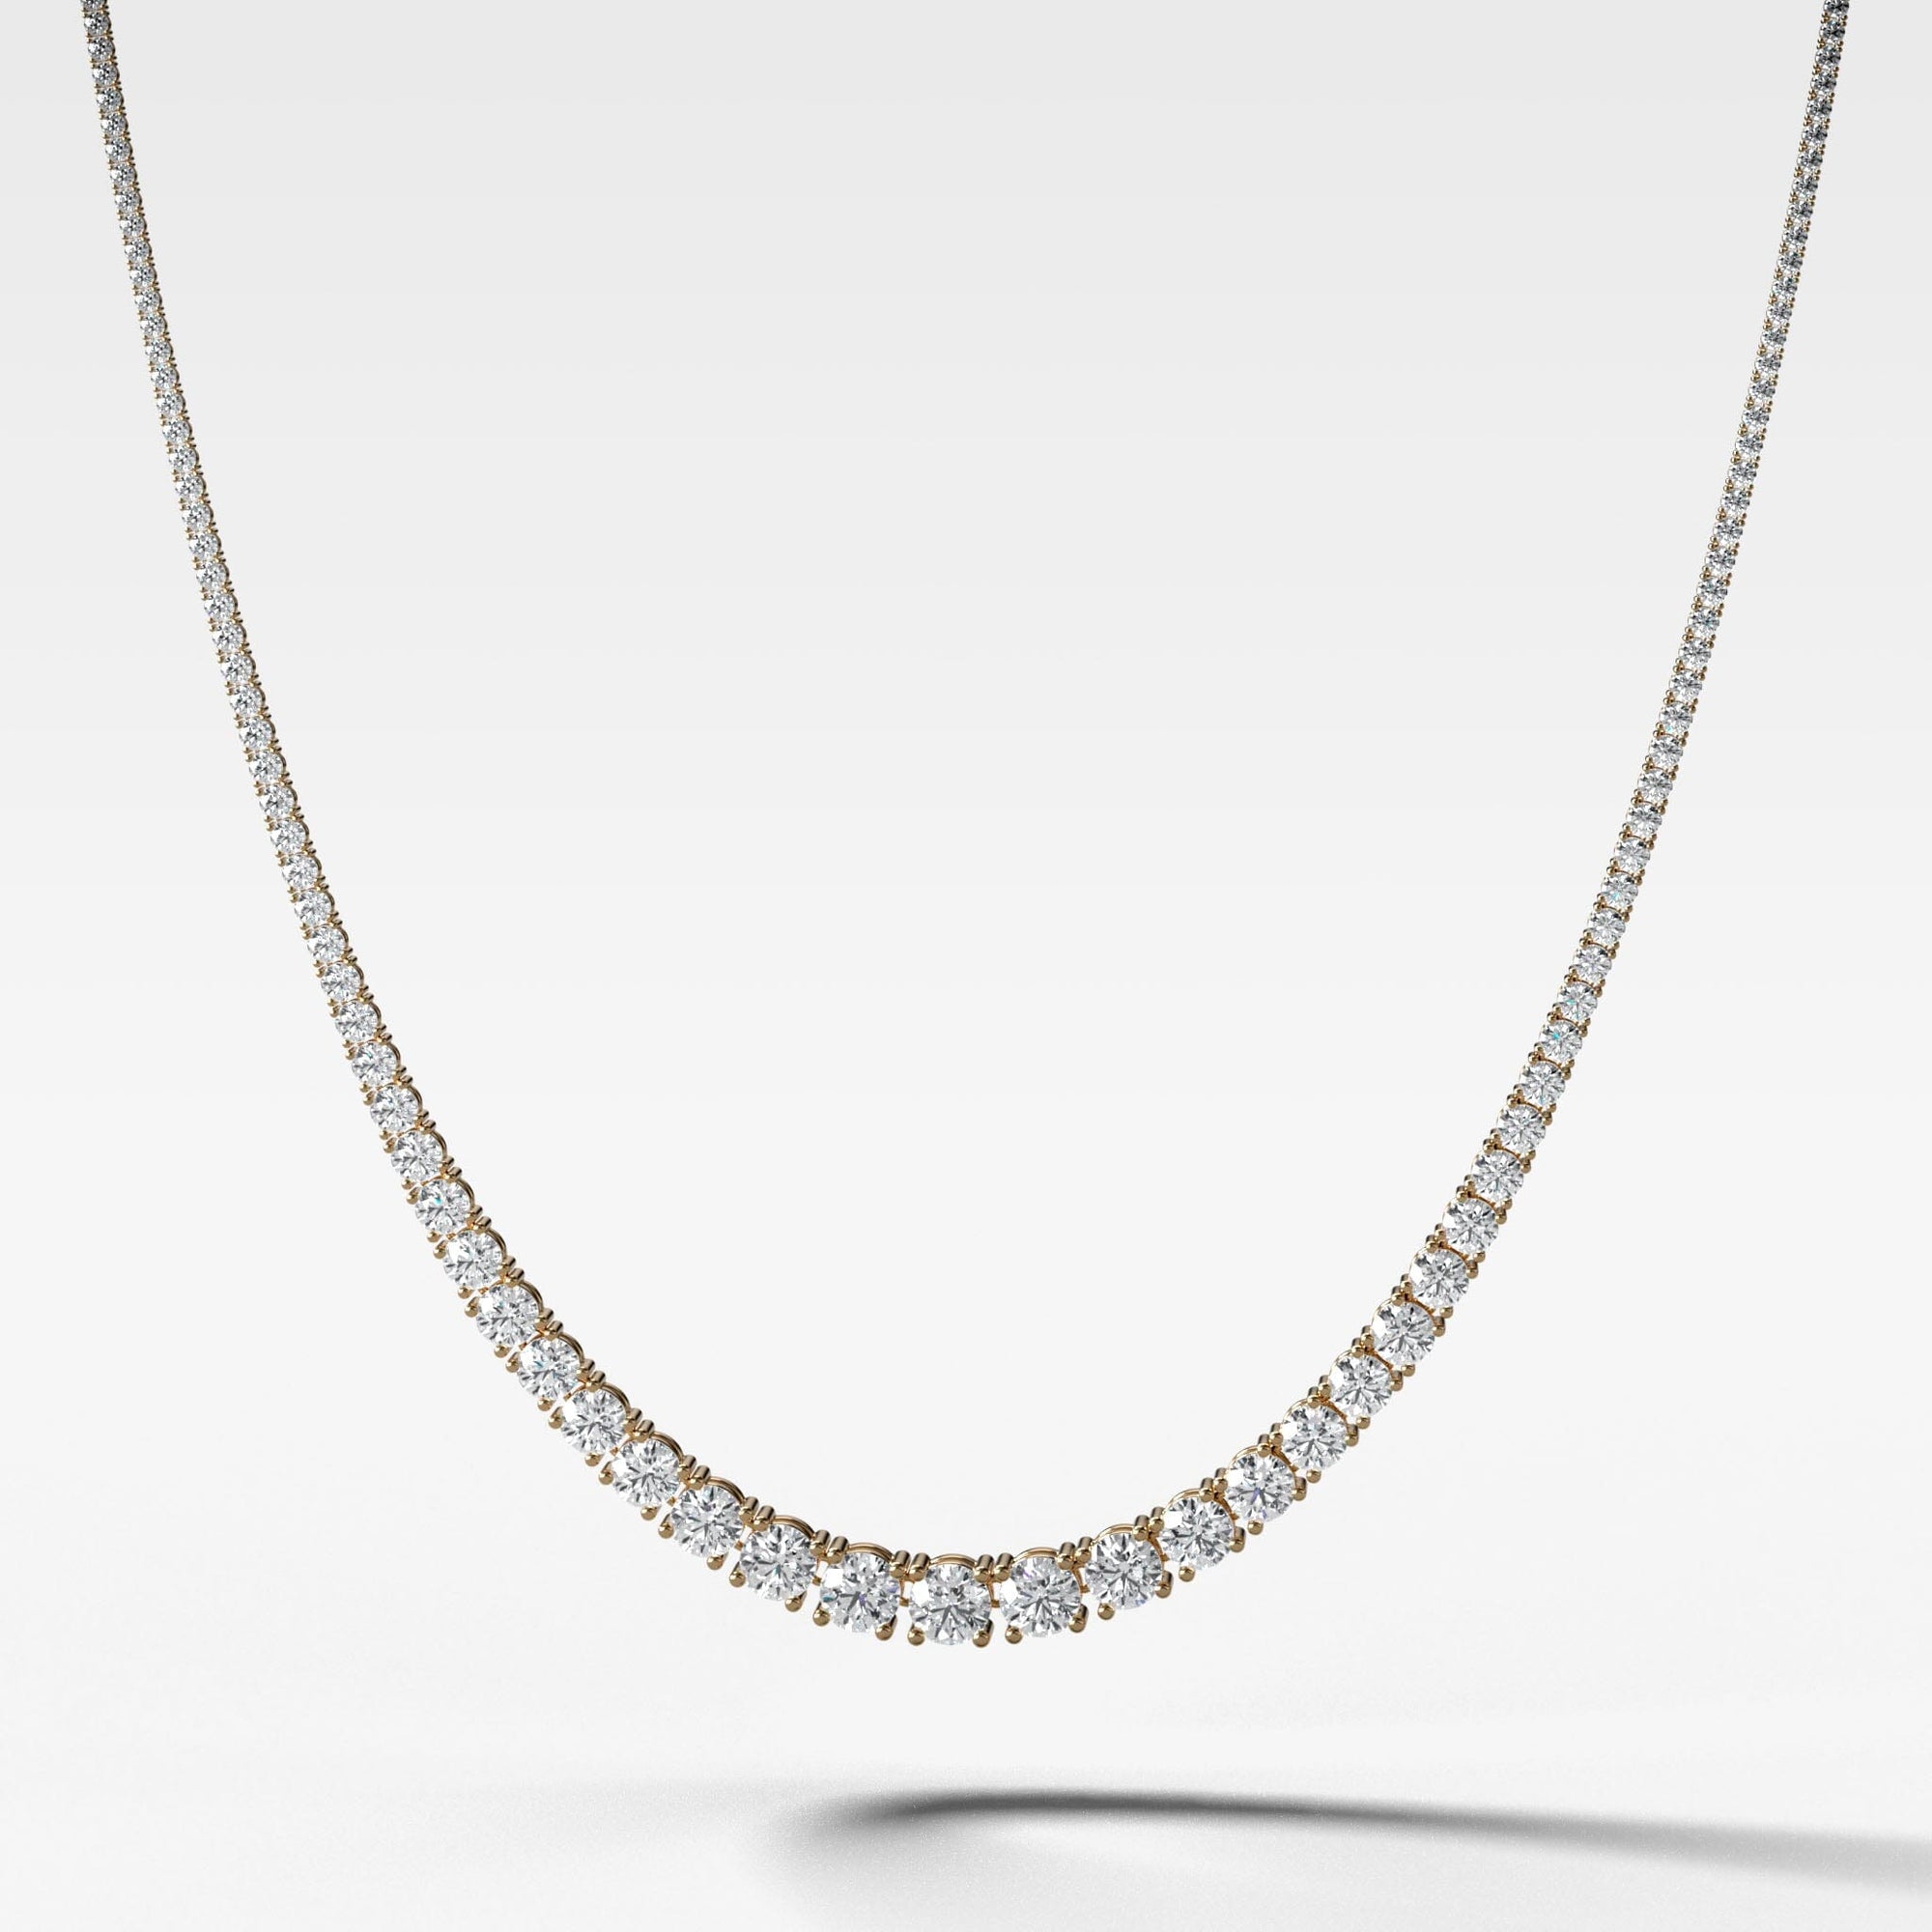 Graduated Tennis Necklace (20.00ctw) Necklace Good Stone Inc White Gold 14k Natural